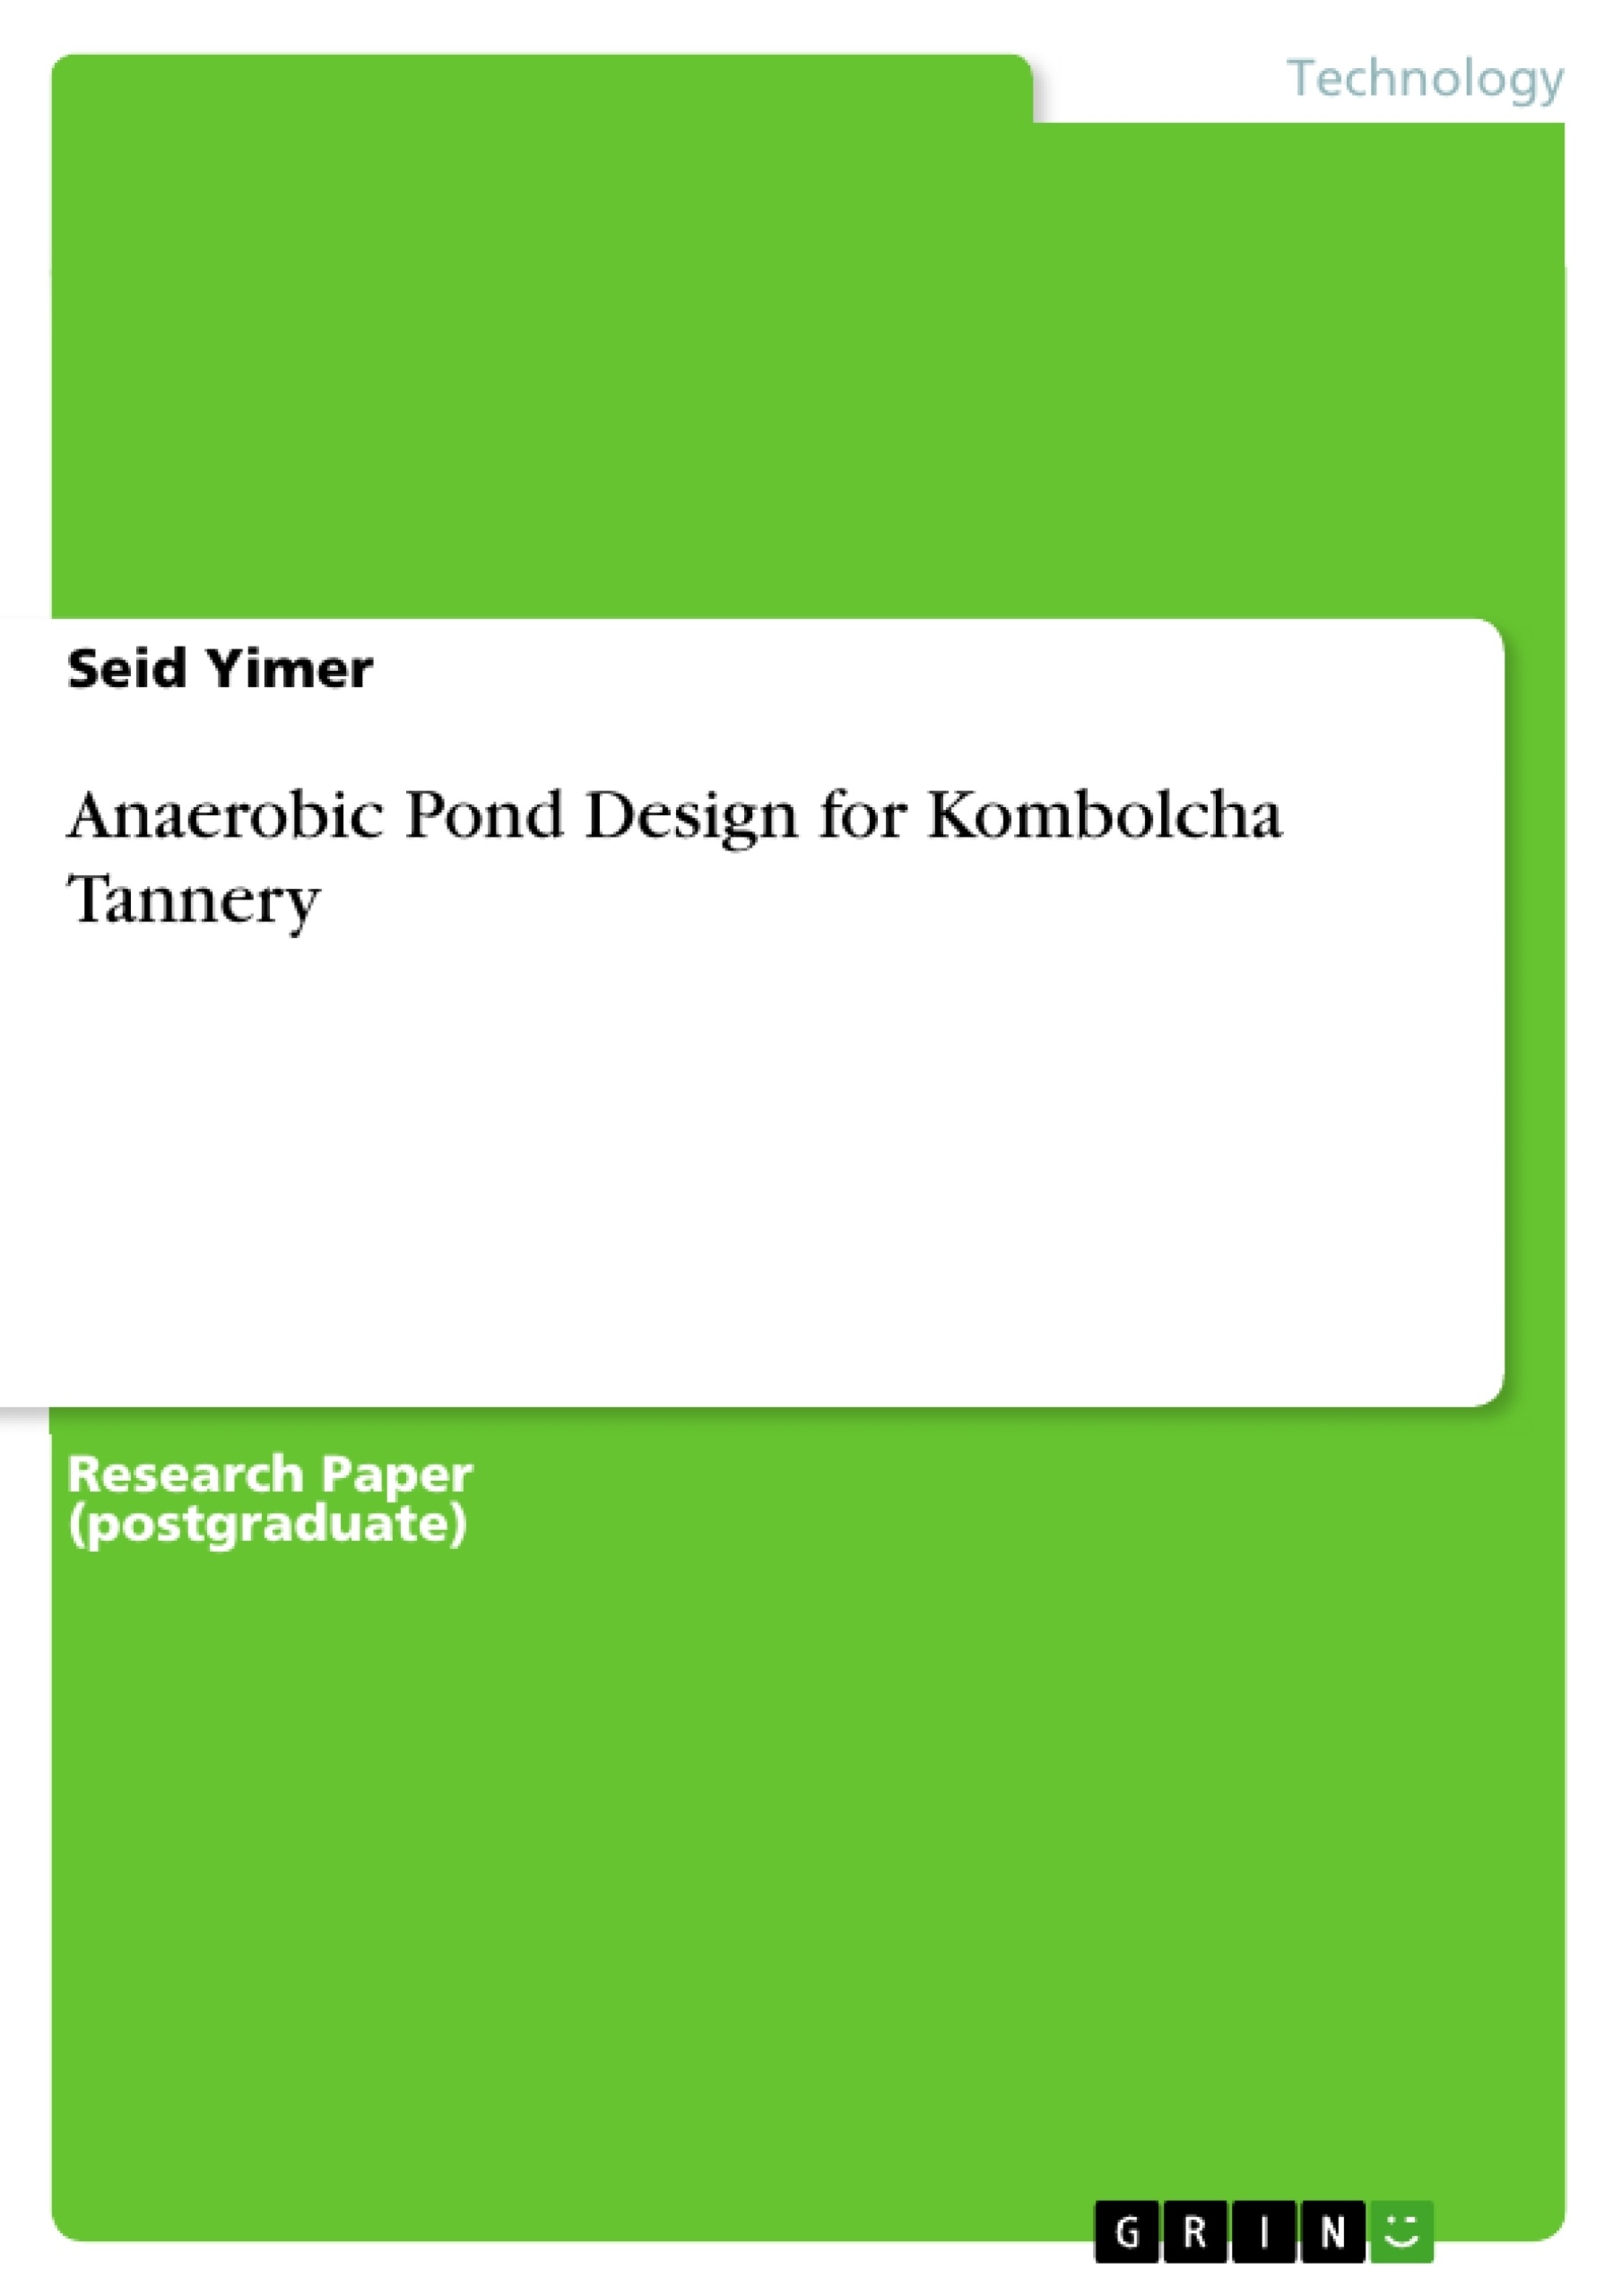 Title: Anaerobic Pond Design for Kombolcha Tannery